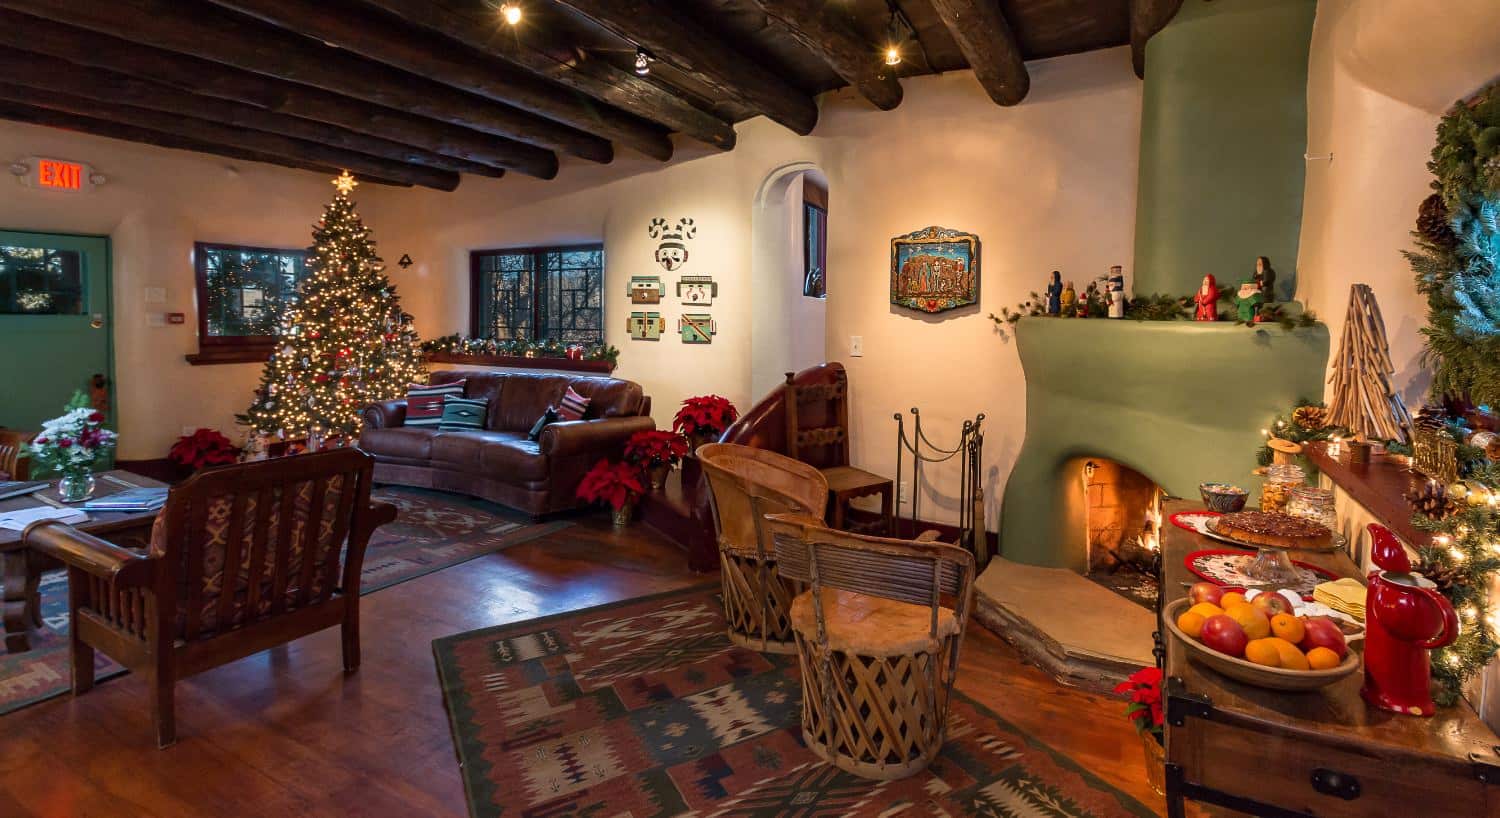 Large gathering room with hardwood floors, cream walls, leather sofa, sitting area, green painted fireplace, and Christmas tree